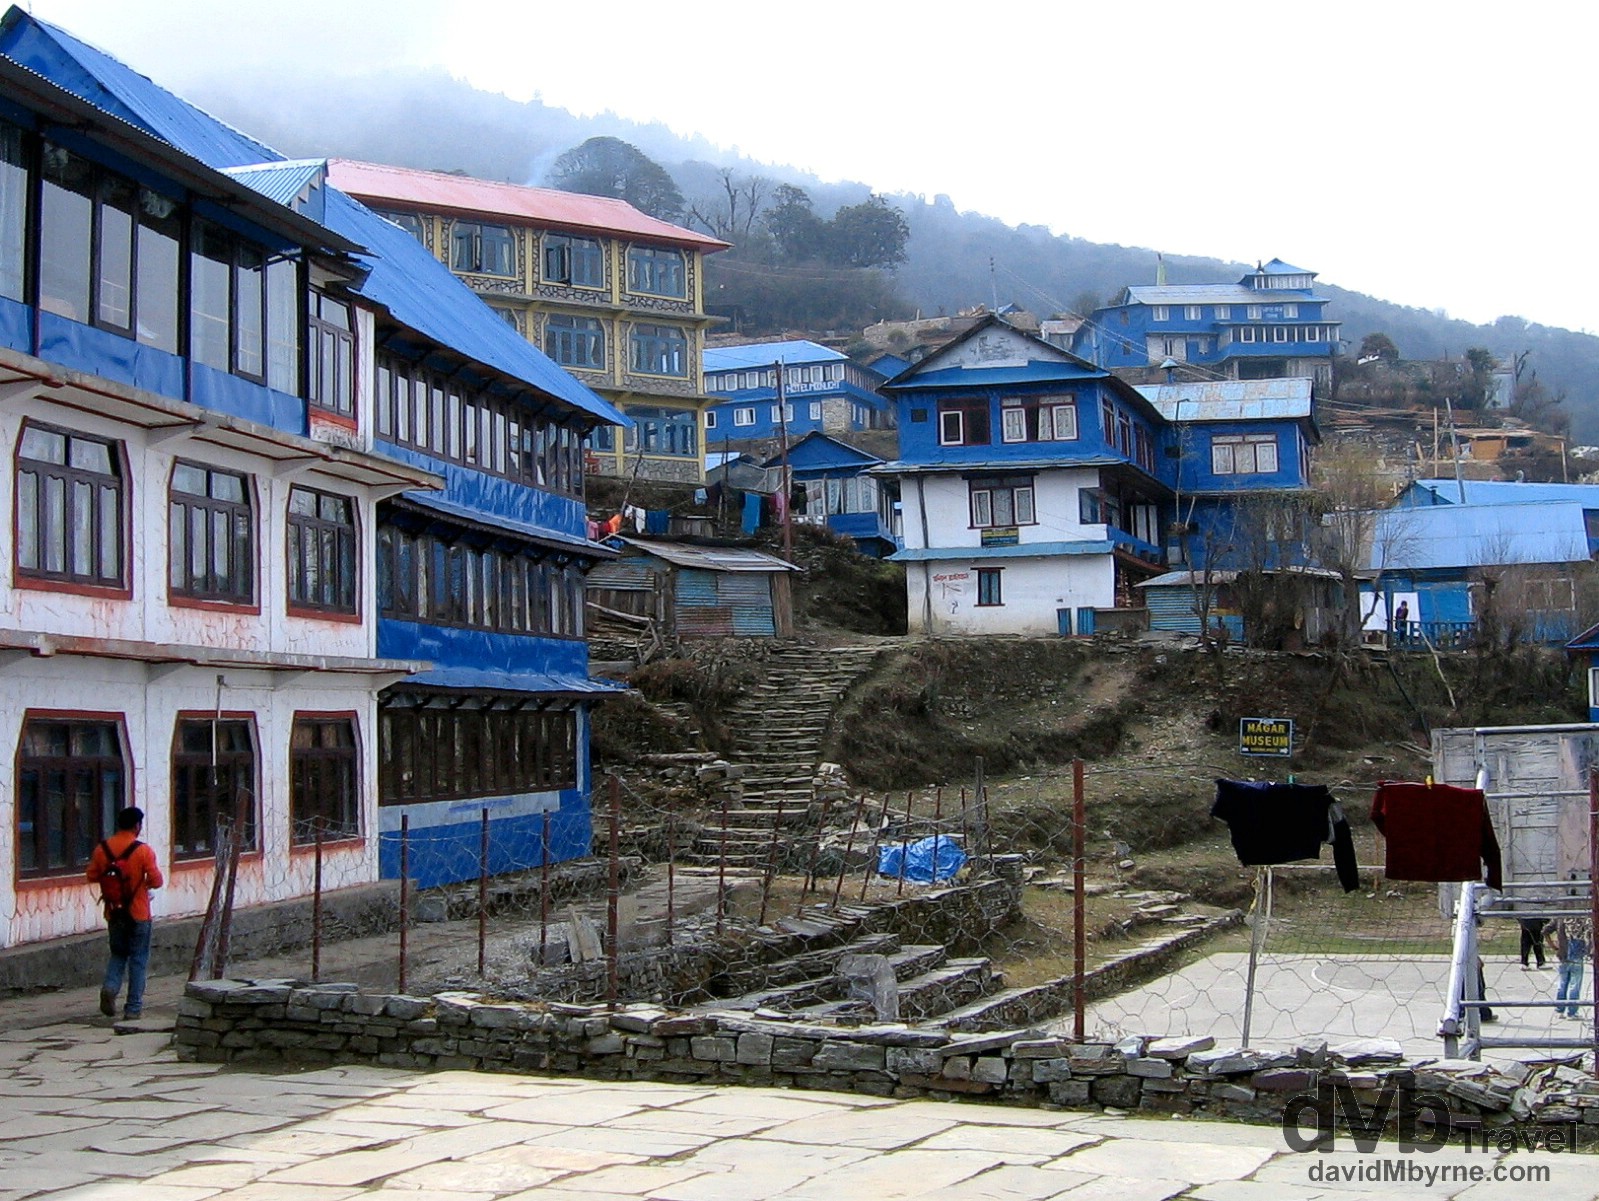 The distinctive blue buildings of Ghorepani village in the Annapurna Conservation Area, western Nepal, the overnight location for day 2 of the region's 3-day Poon Hill trek. March 12th, 2008.